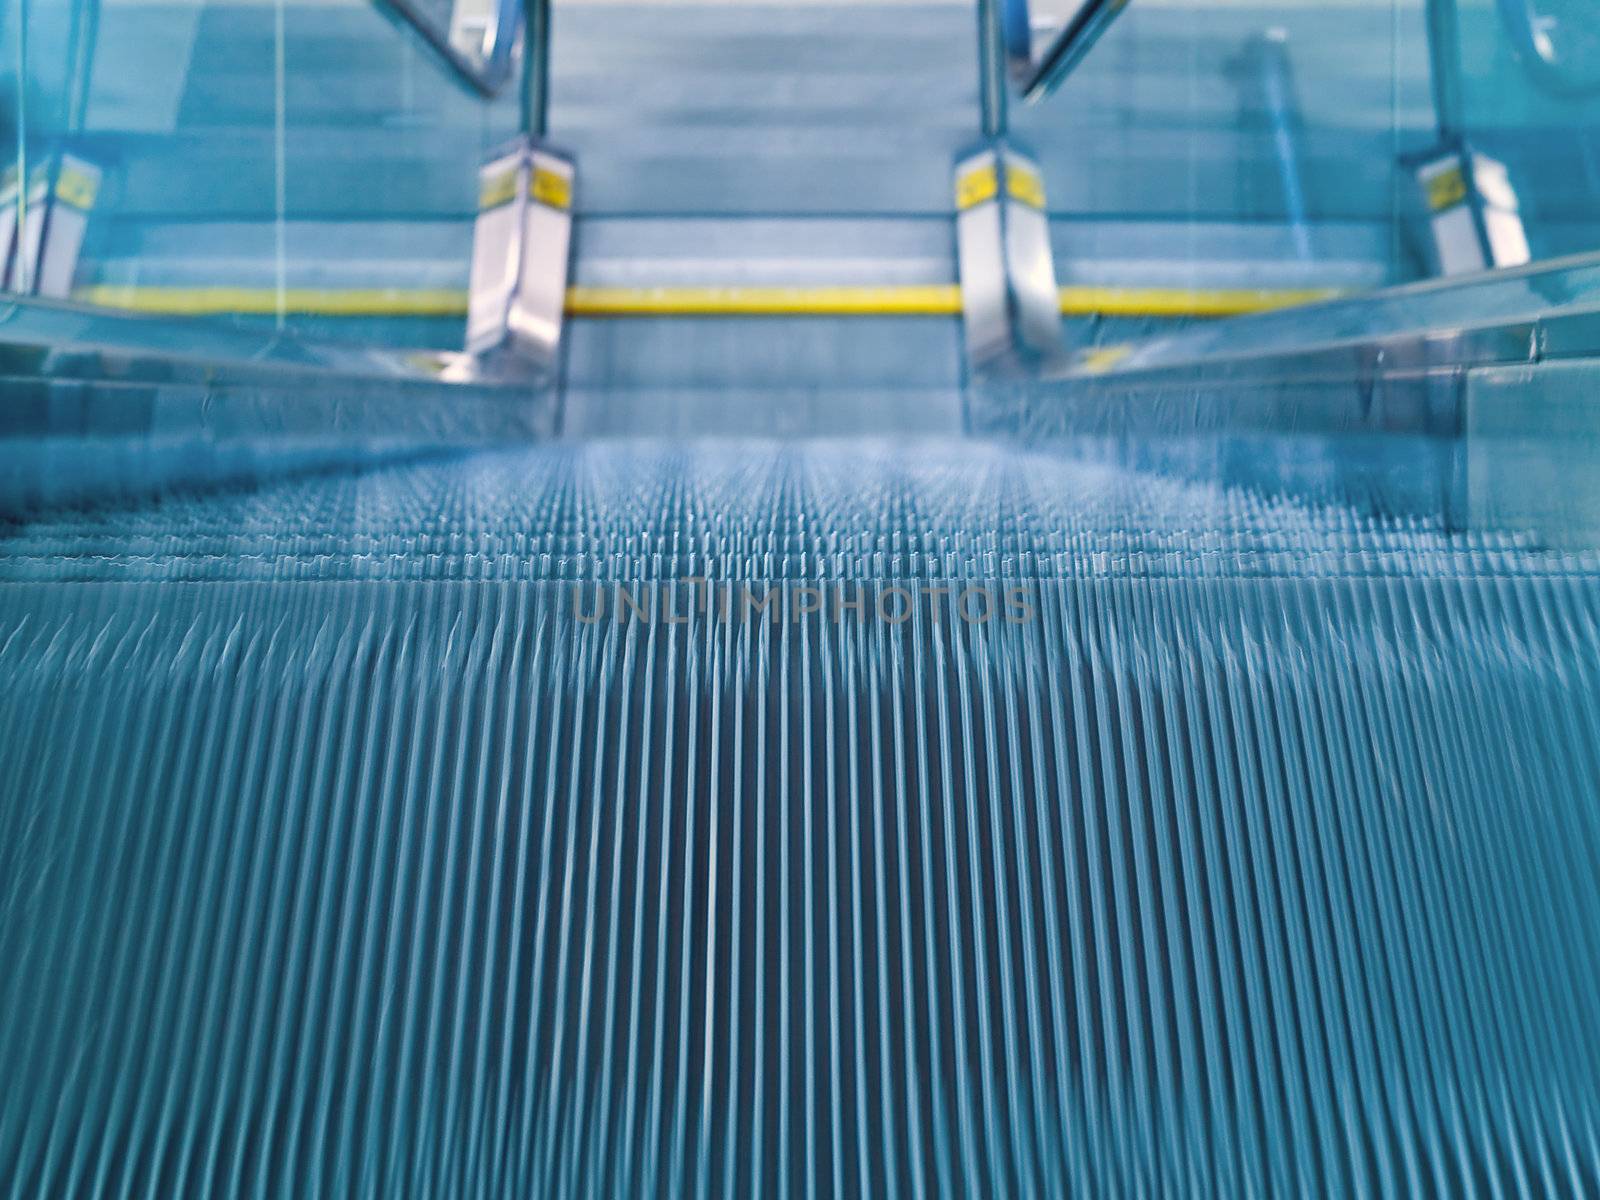 An airport escalator from the top landing showing motion blur